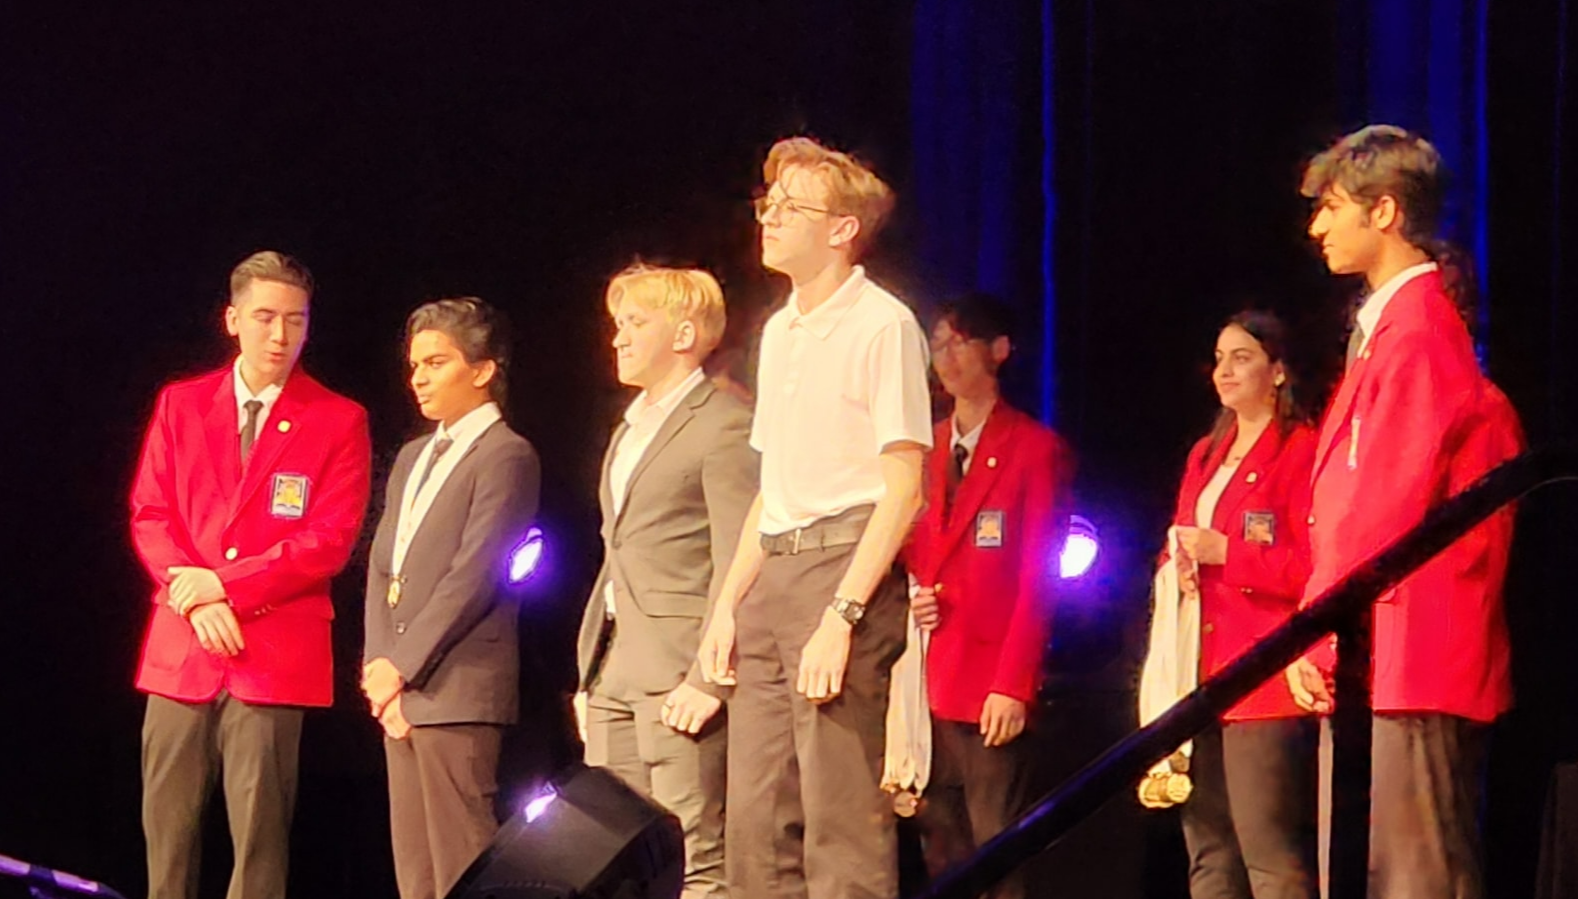 Students on stage competing at SkillsUSA